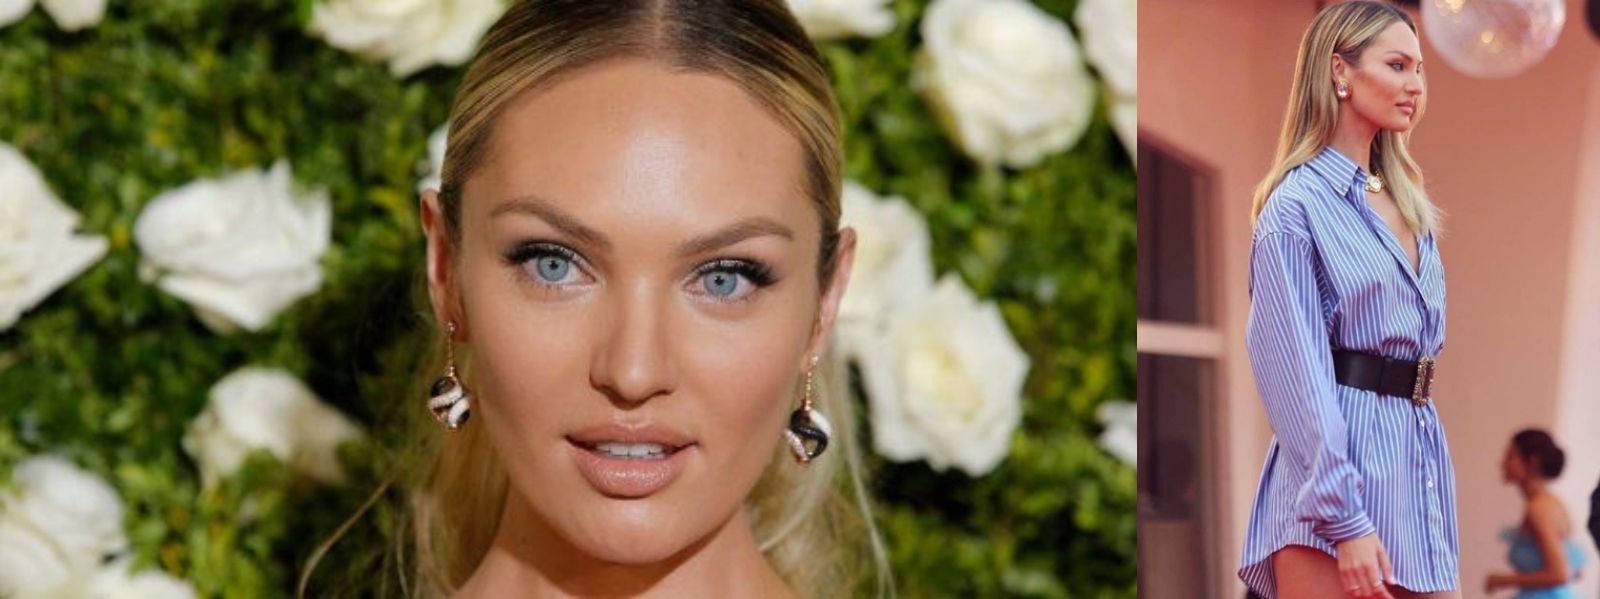 images easyblog articles 8270 Candice Swanepoel RED CARPET adc38d27